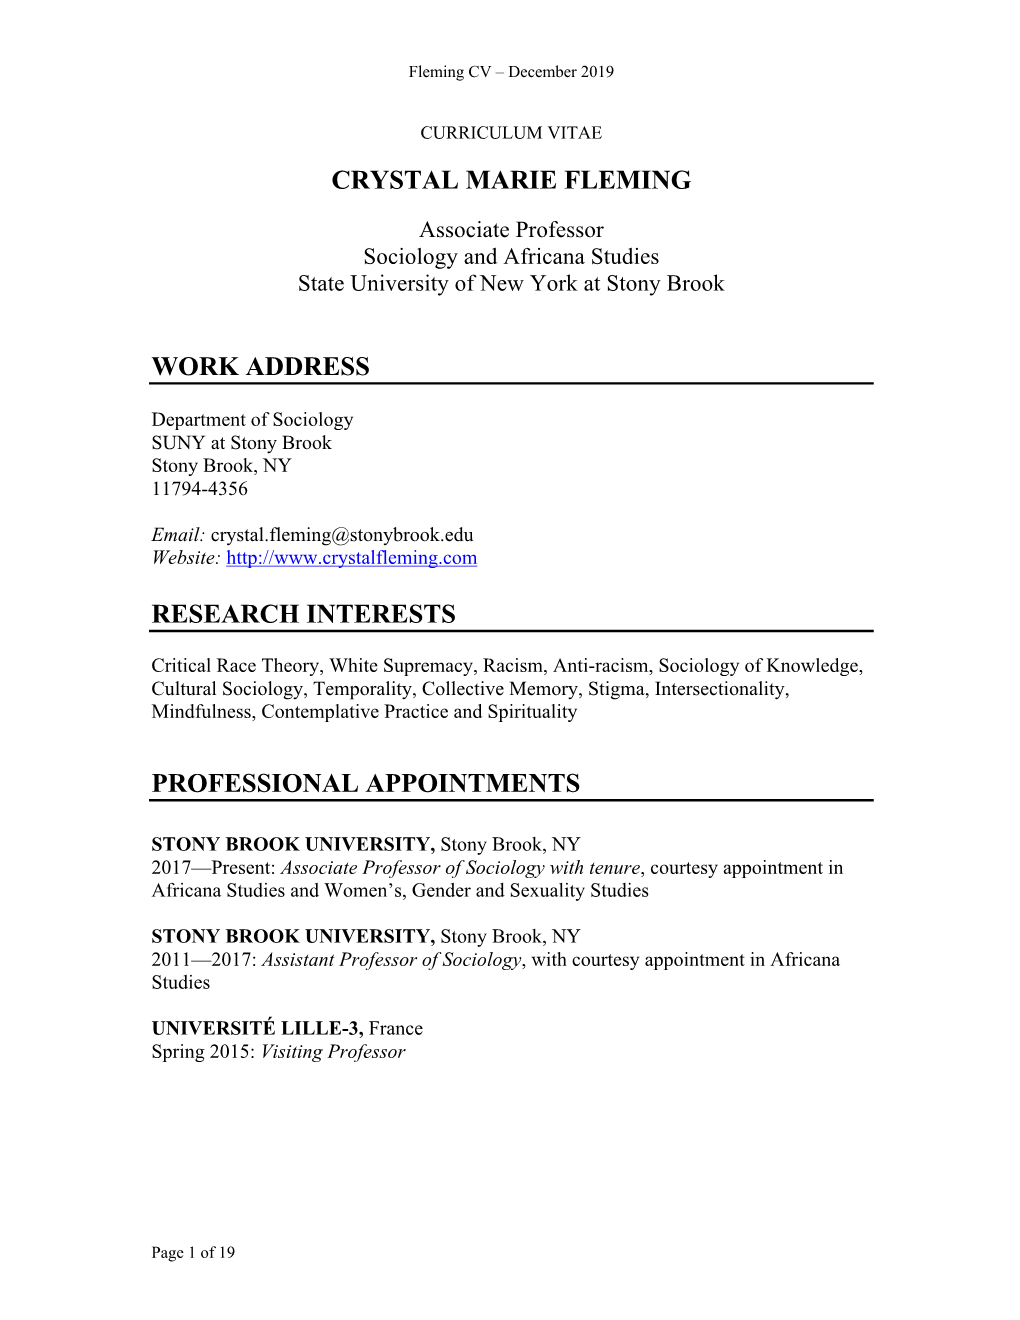 Crystal Marie Fleming Work Address Research